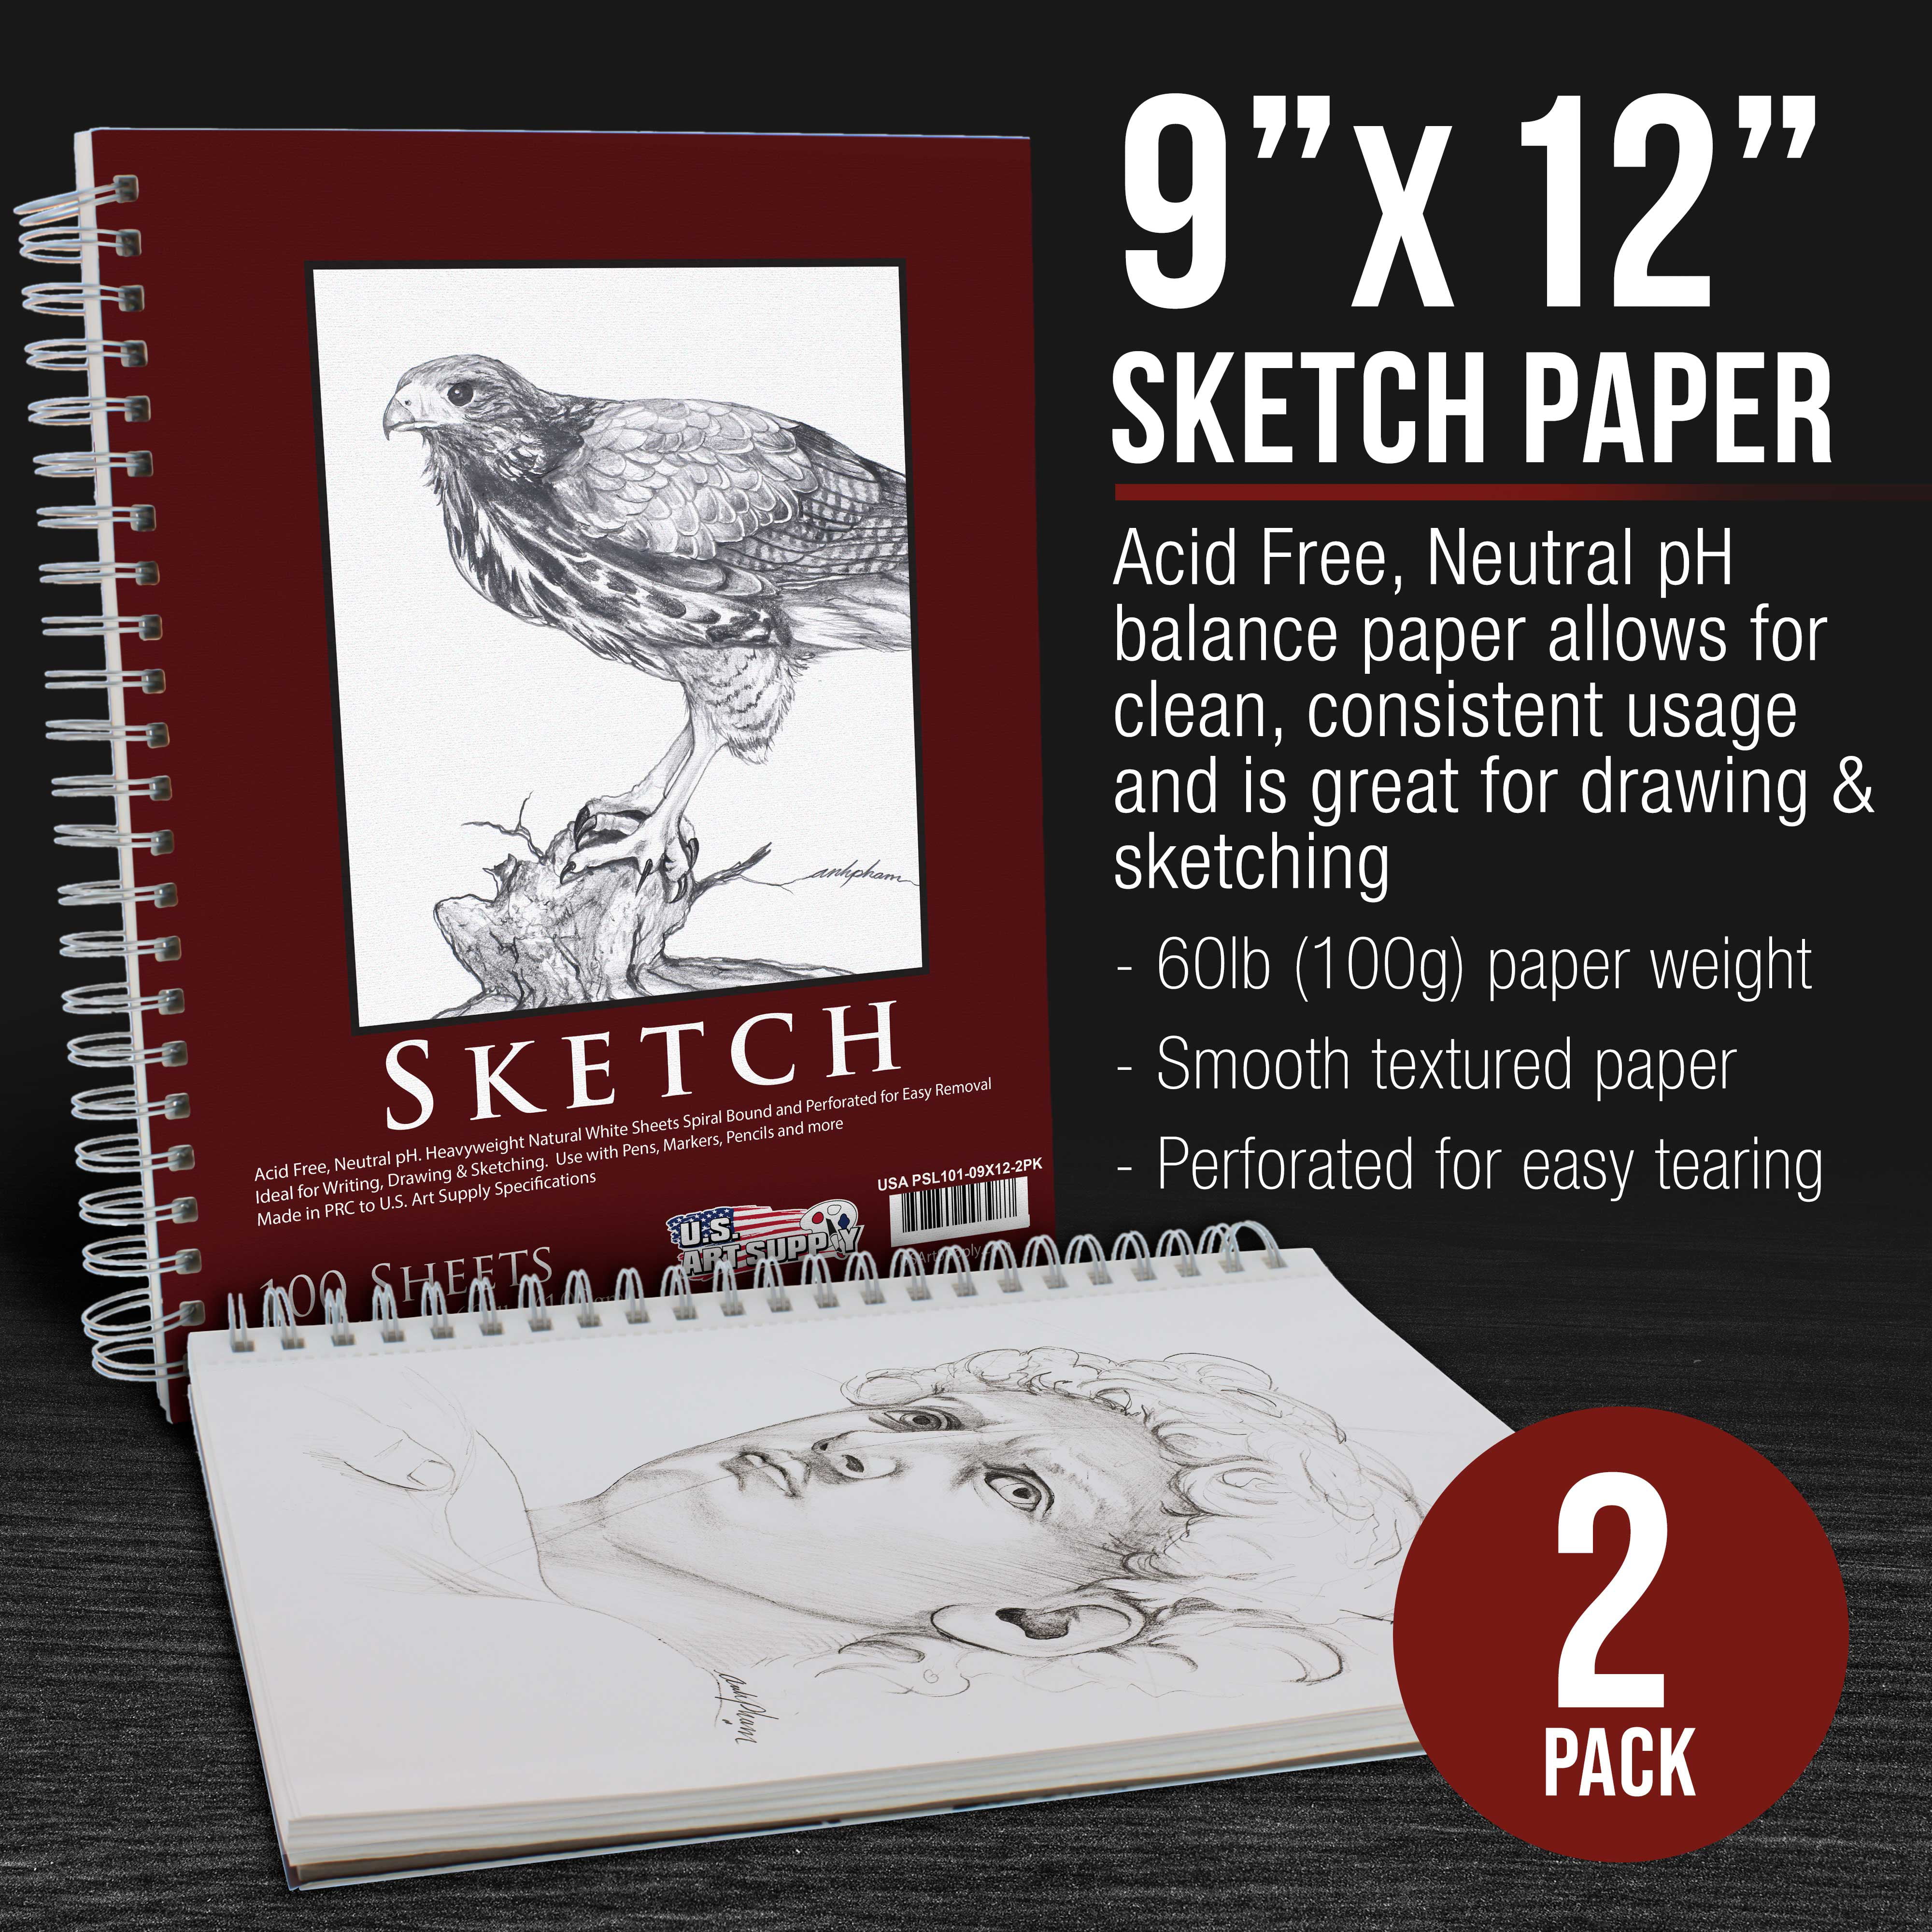 Nature Drawing and Journaling Book and Supplies Bundle